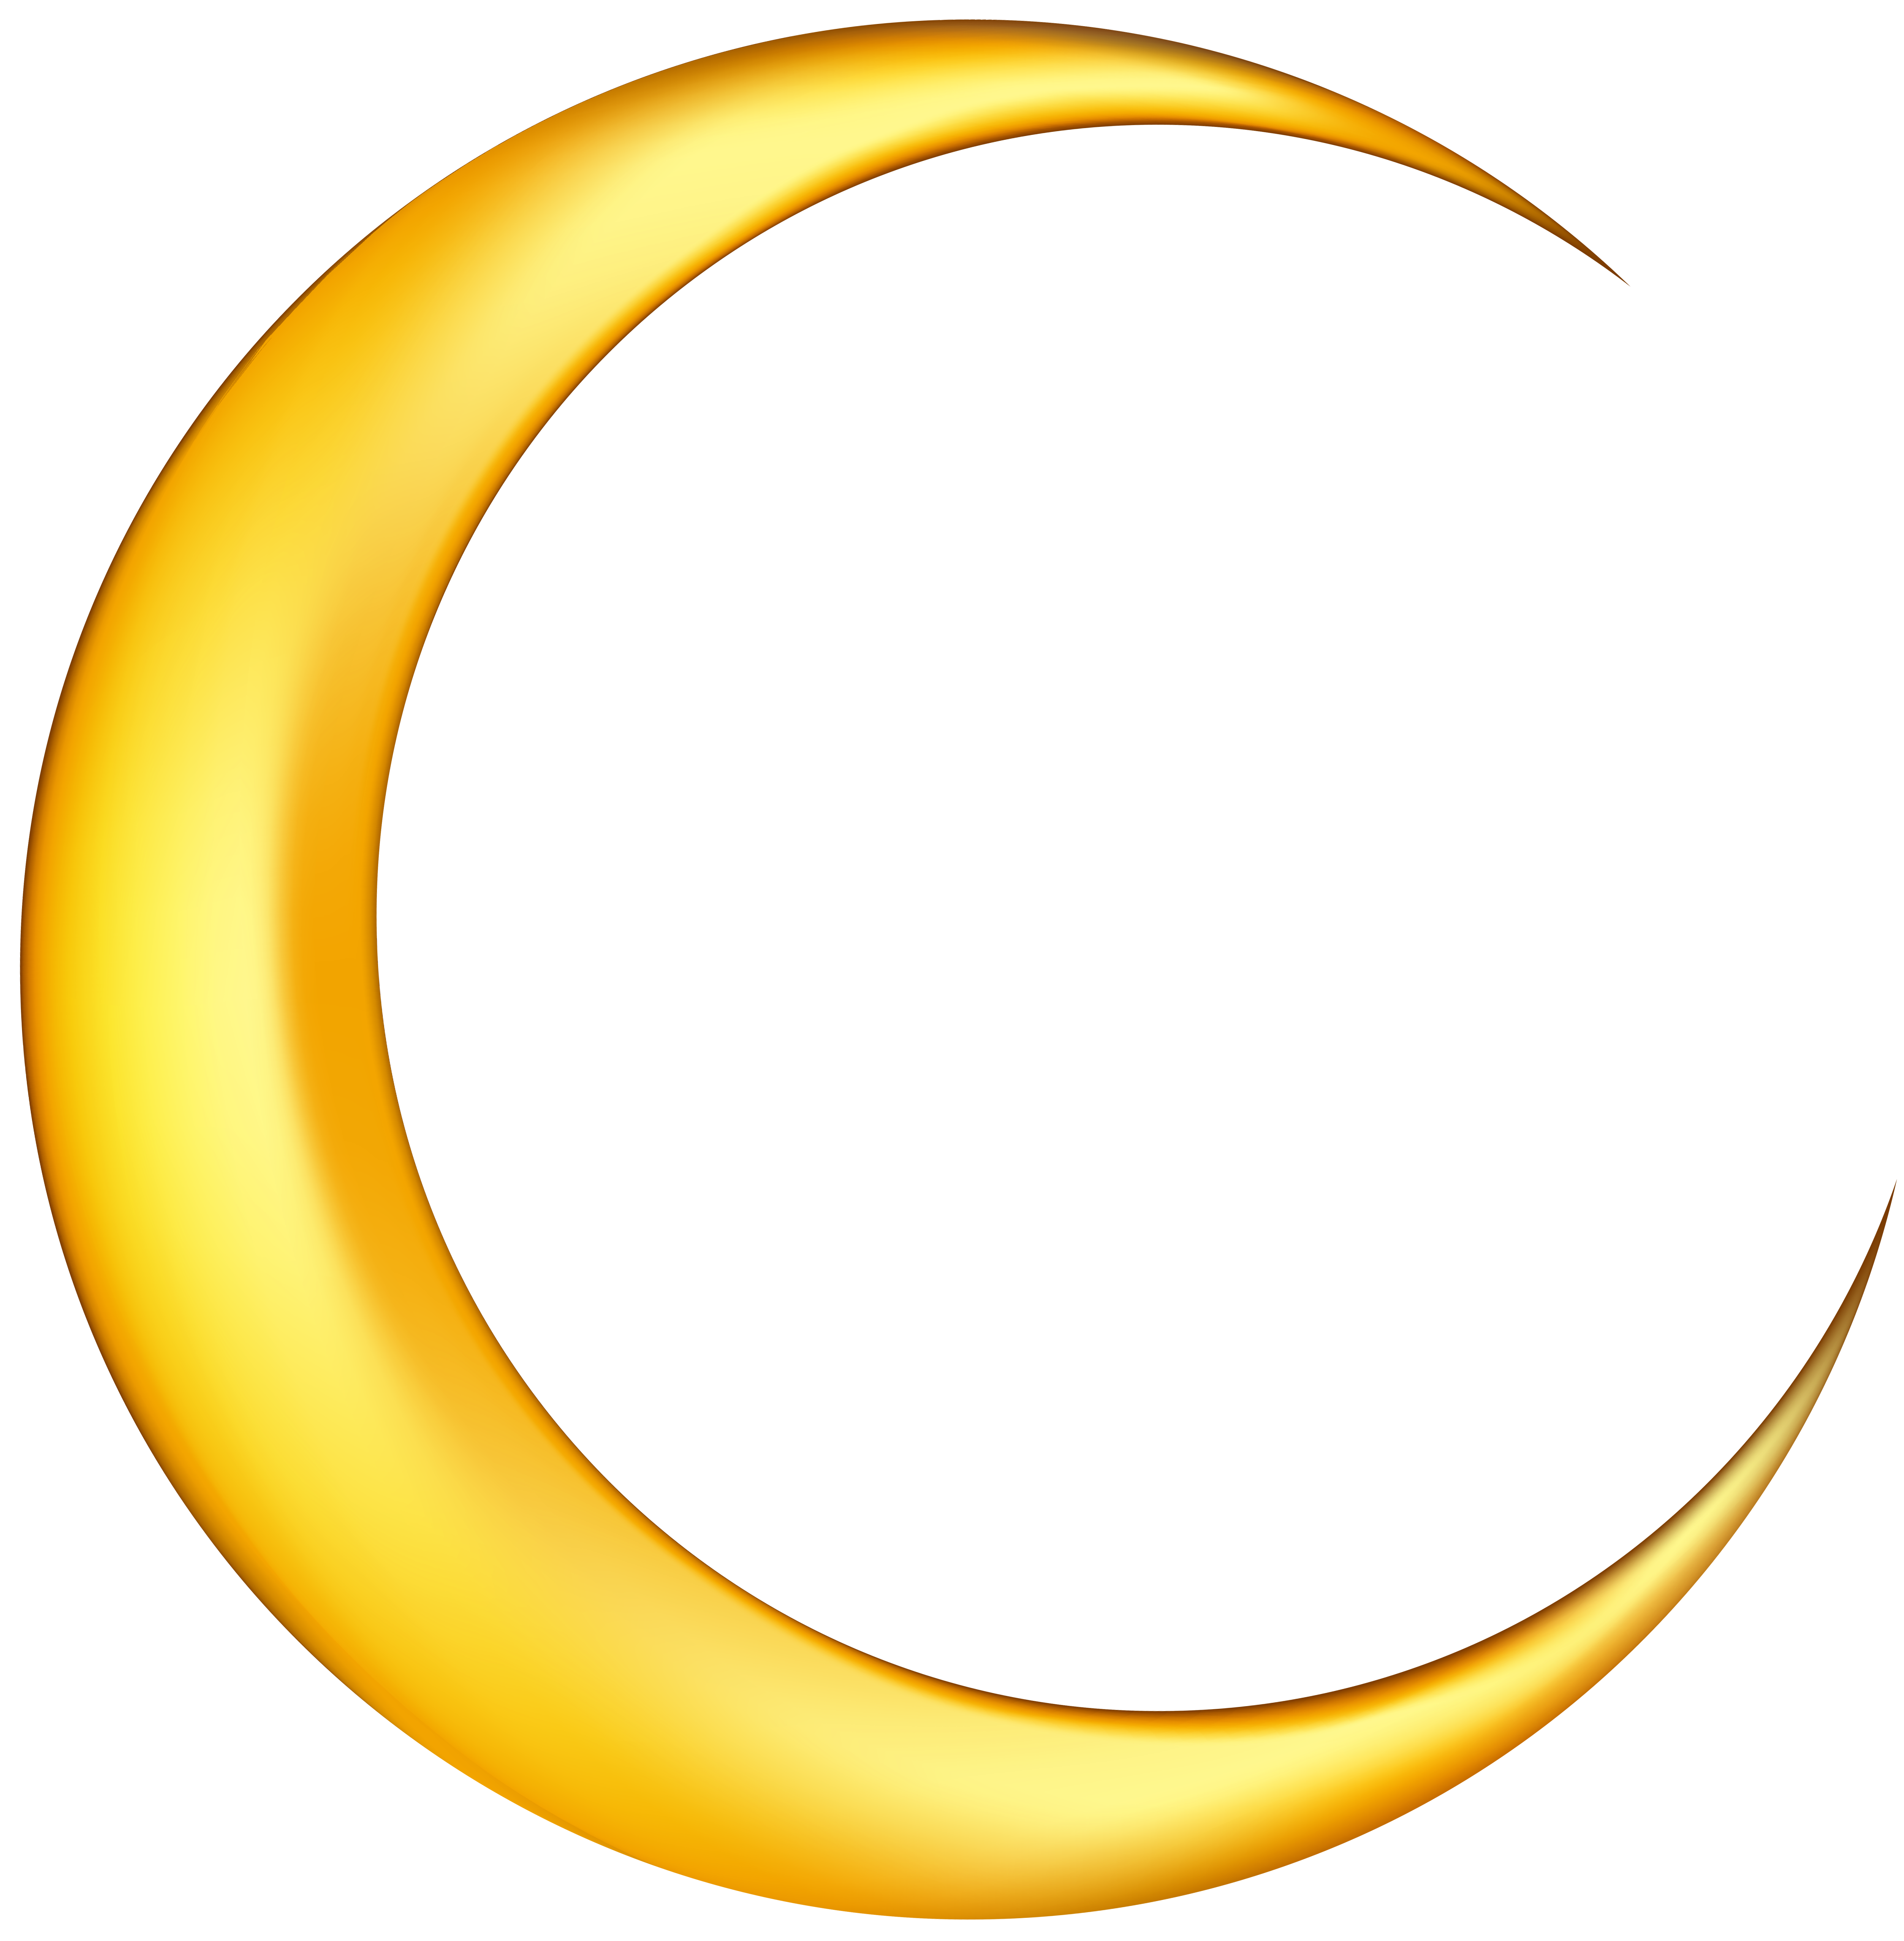 Yellow new moon clip art image gallery yopriceville high png